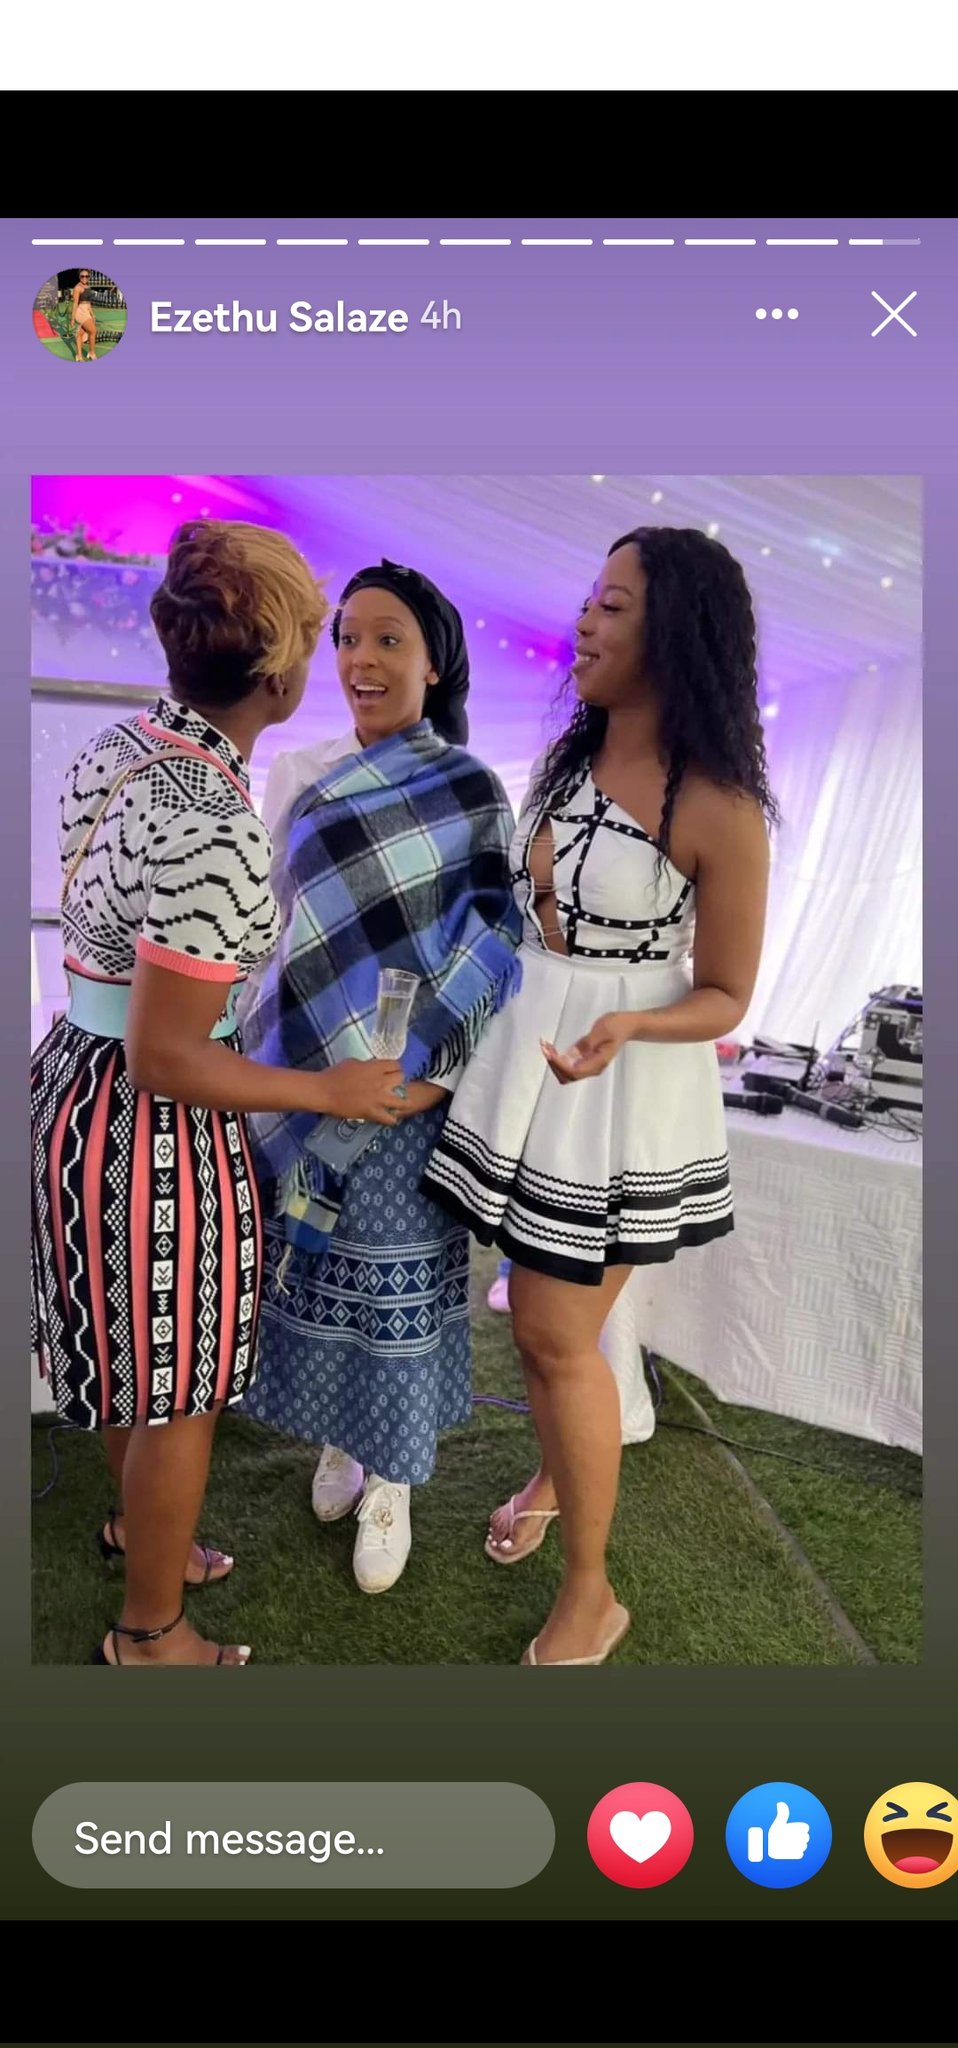 Buhle Samuels Married? Photos Of Traditional Wedding Spark Frenzy